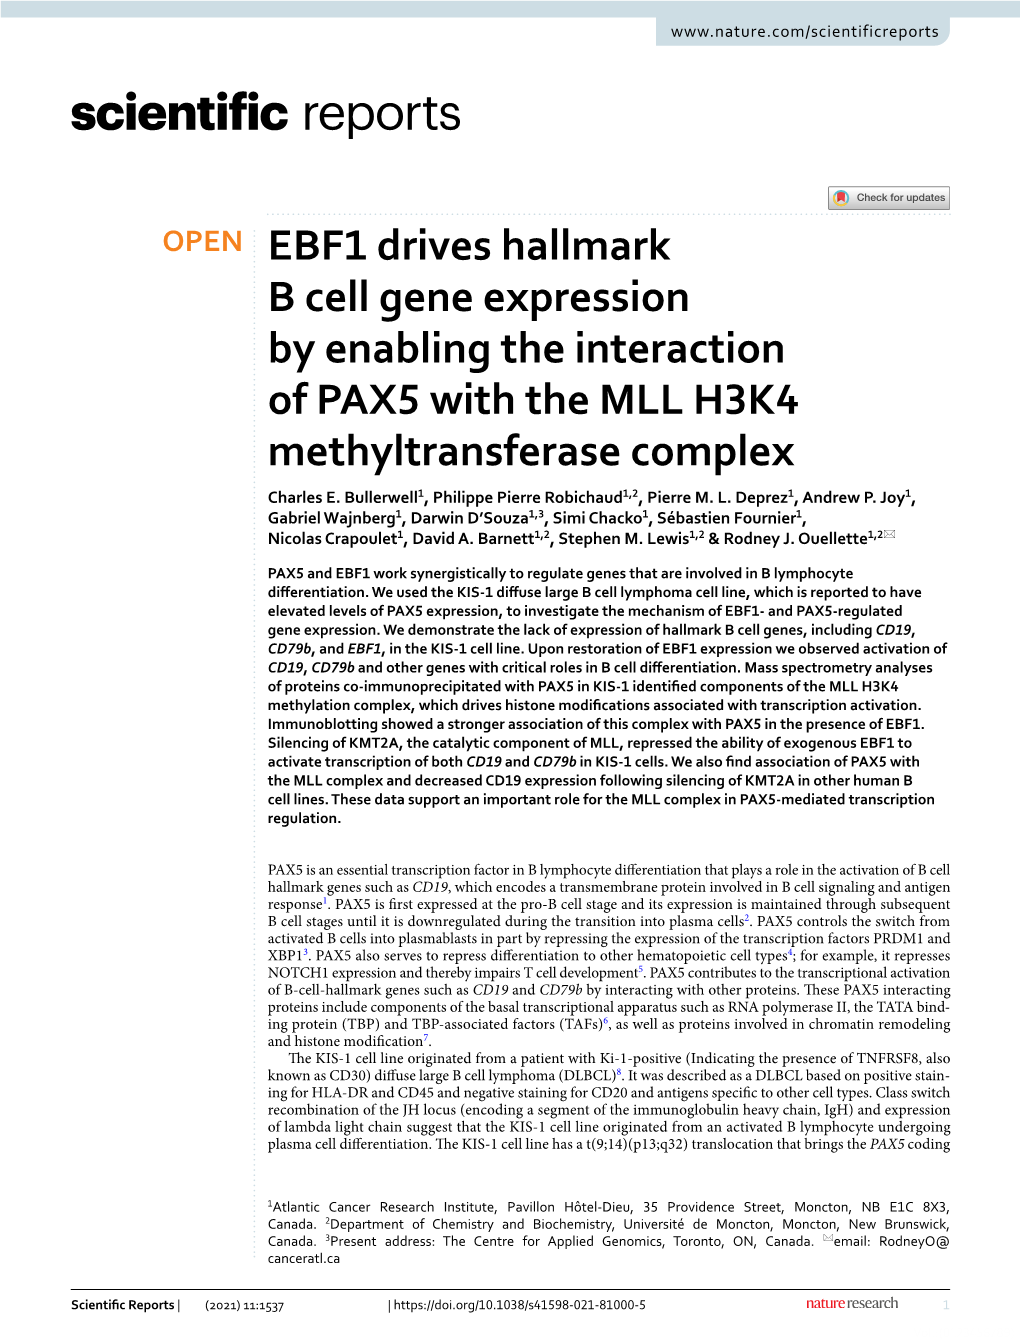 EBF1 Drives Hallmark B Cell Gene Expression by Enabling the Interaction of PAX5 with the MLL H3K4 Methyltransferase Complex Charles E